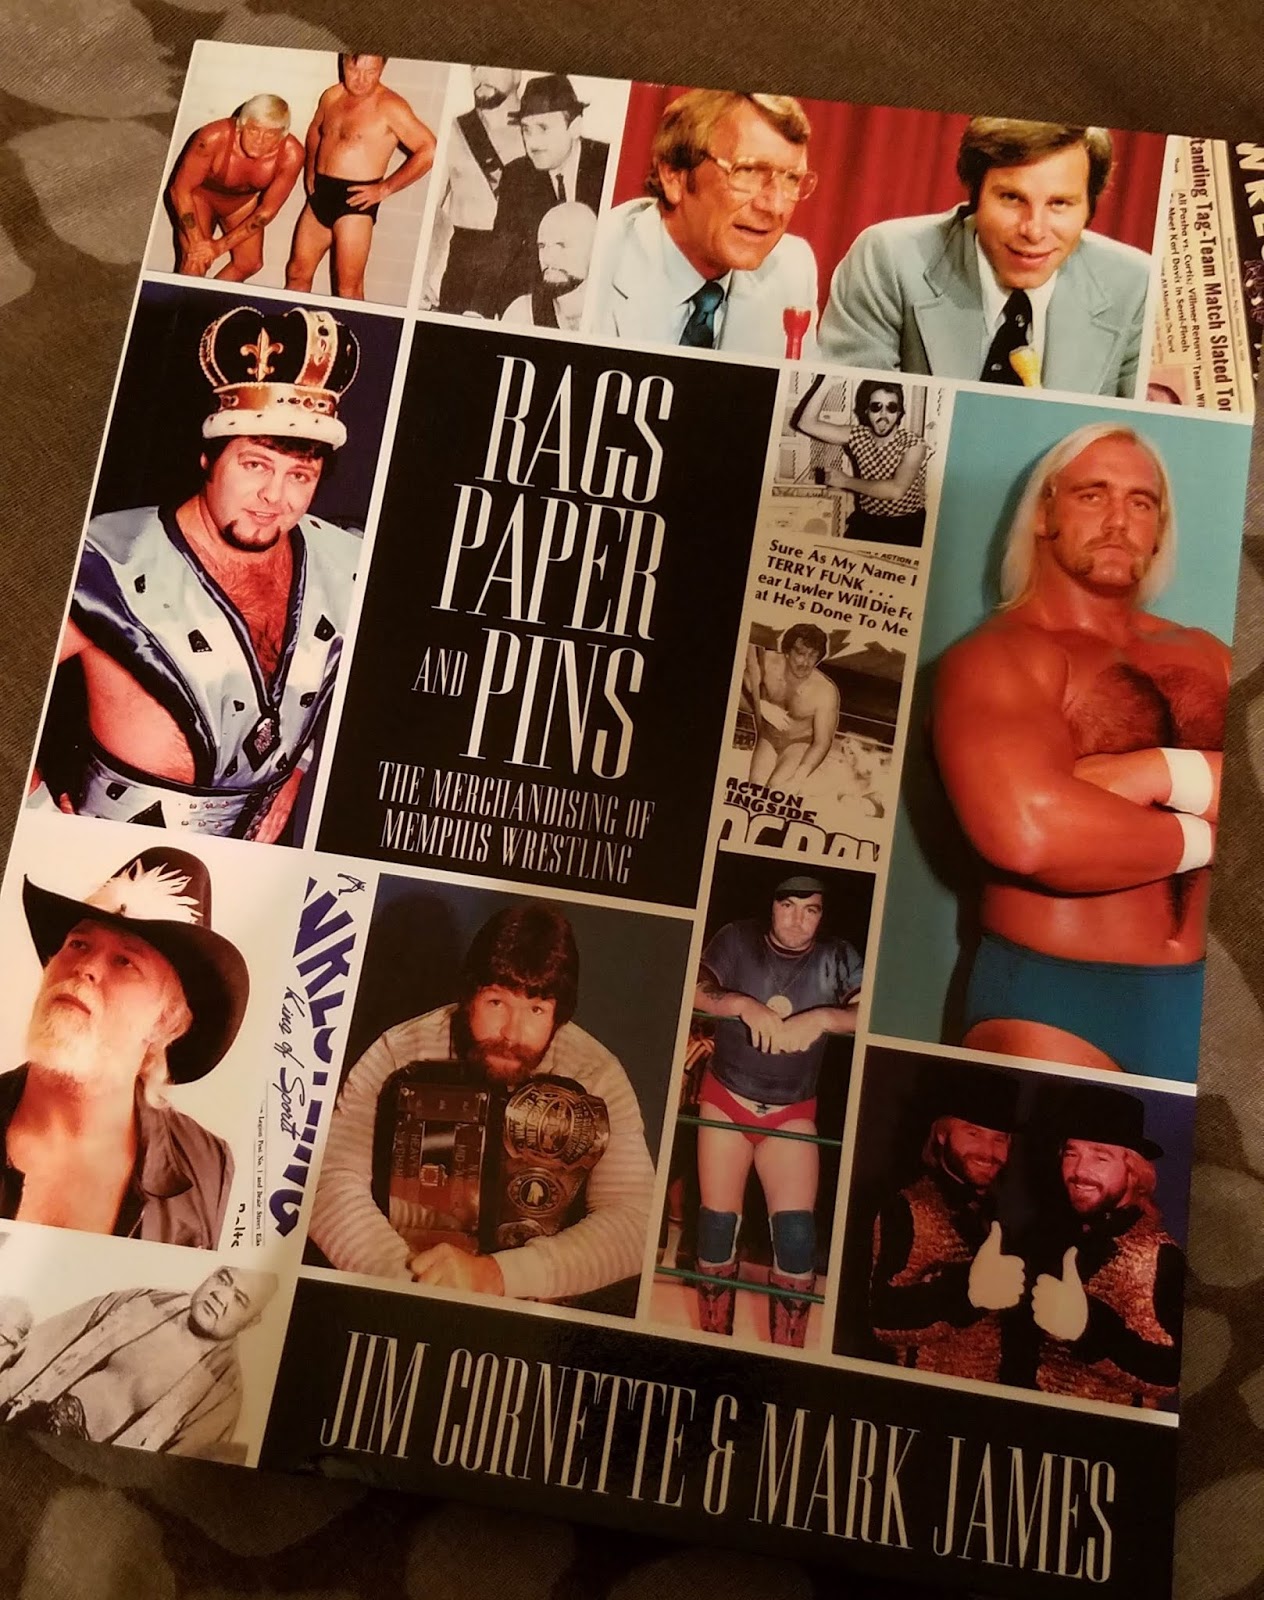 The Wrestling Insomniac: Rags, Paper and Pins: The Merchandising